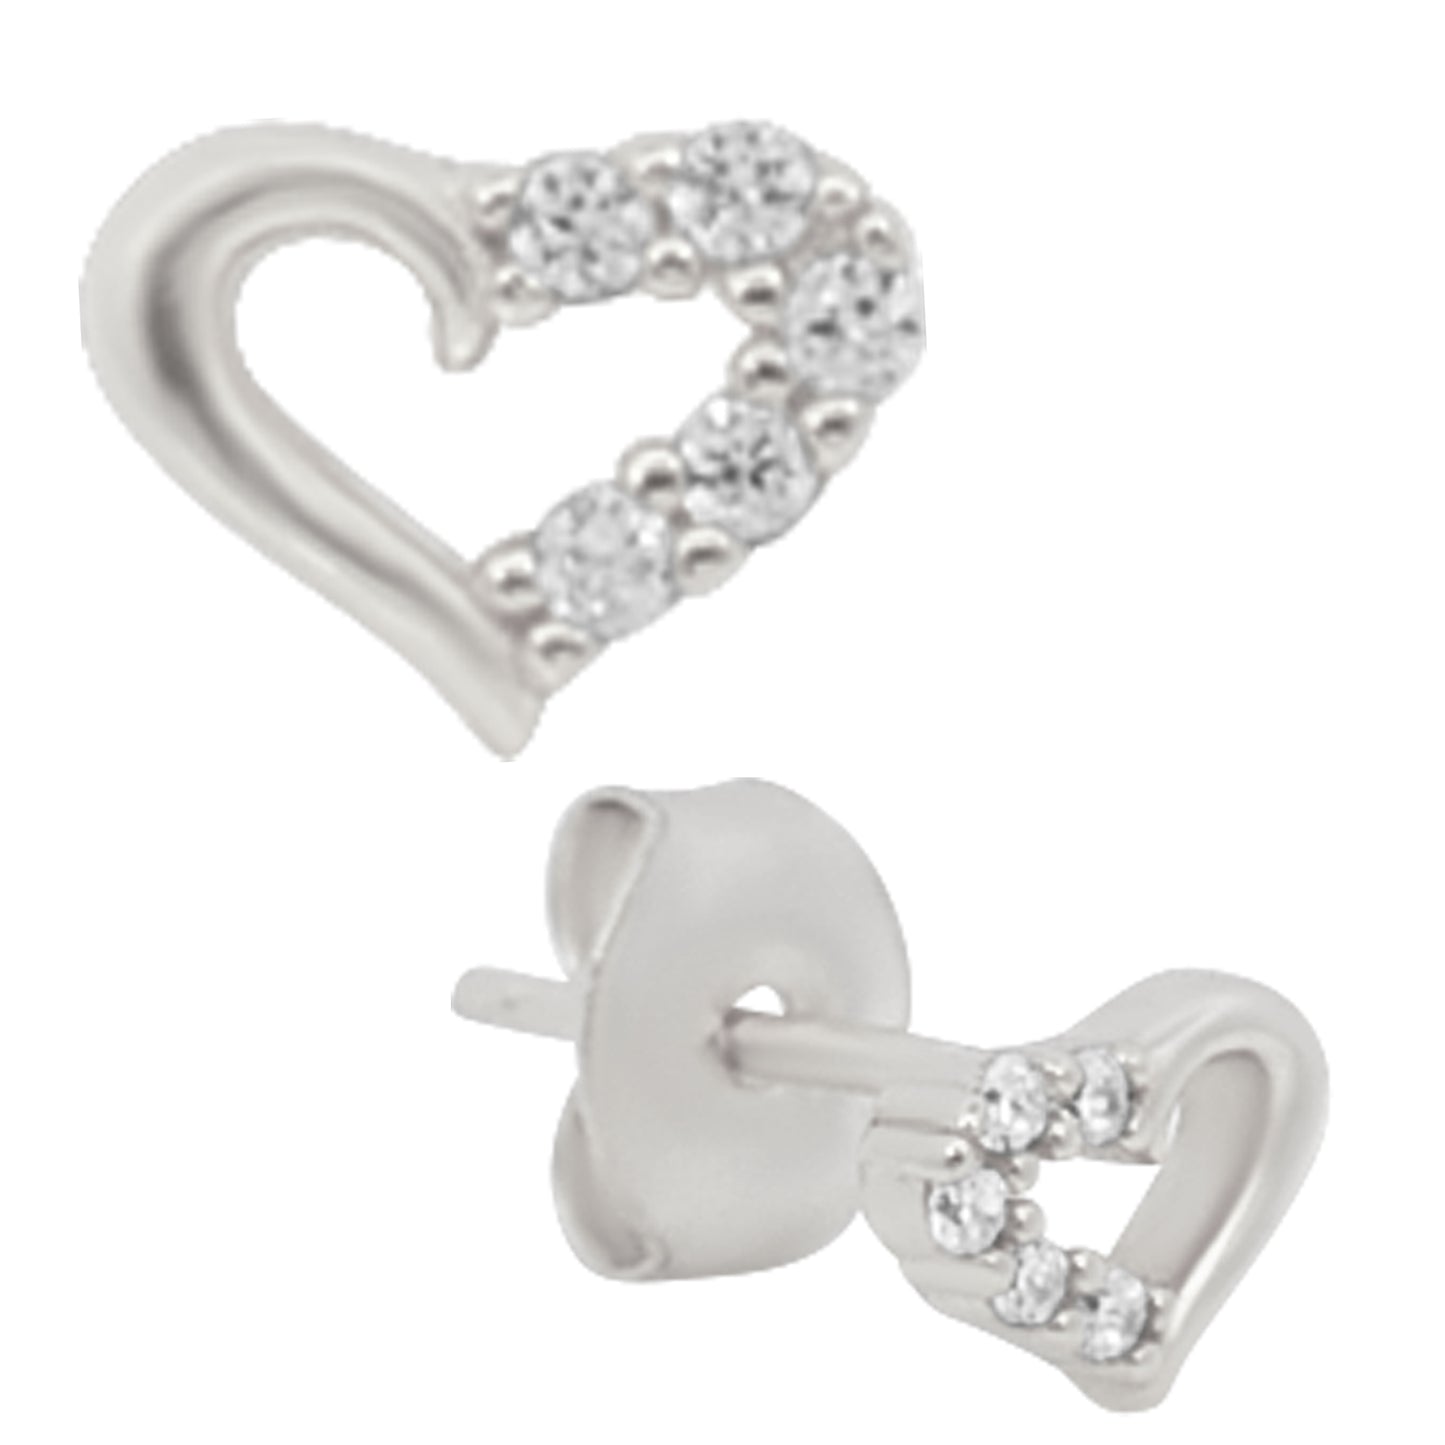 Romantic Heart Hollow Earrings, Sterling Silver CZ Studs, Push Backing, Sparkling Zirconia, Gift for Women